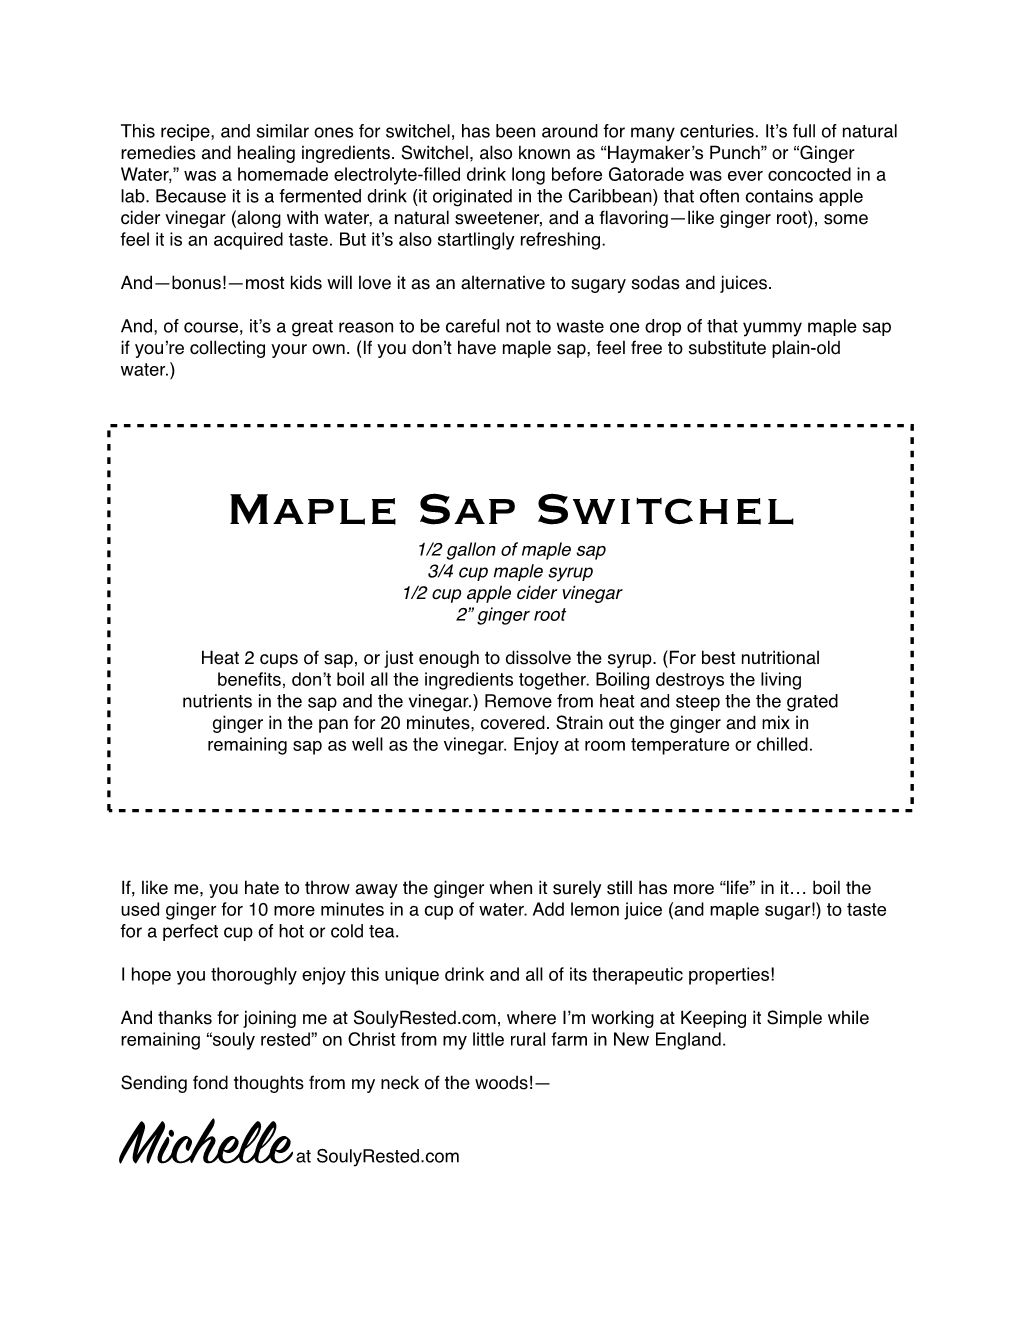 Maple Sap Switchel 1/2 Gallon of Maple Sap 3/4 Cup Maple Syrup 1/2 Cup Apple Cider Vinegar 2” Ginger Root